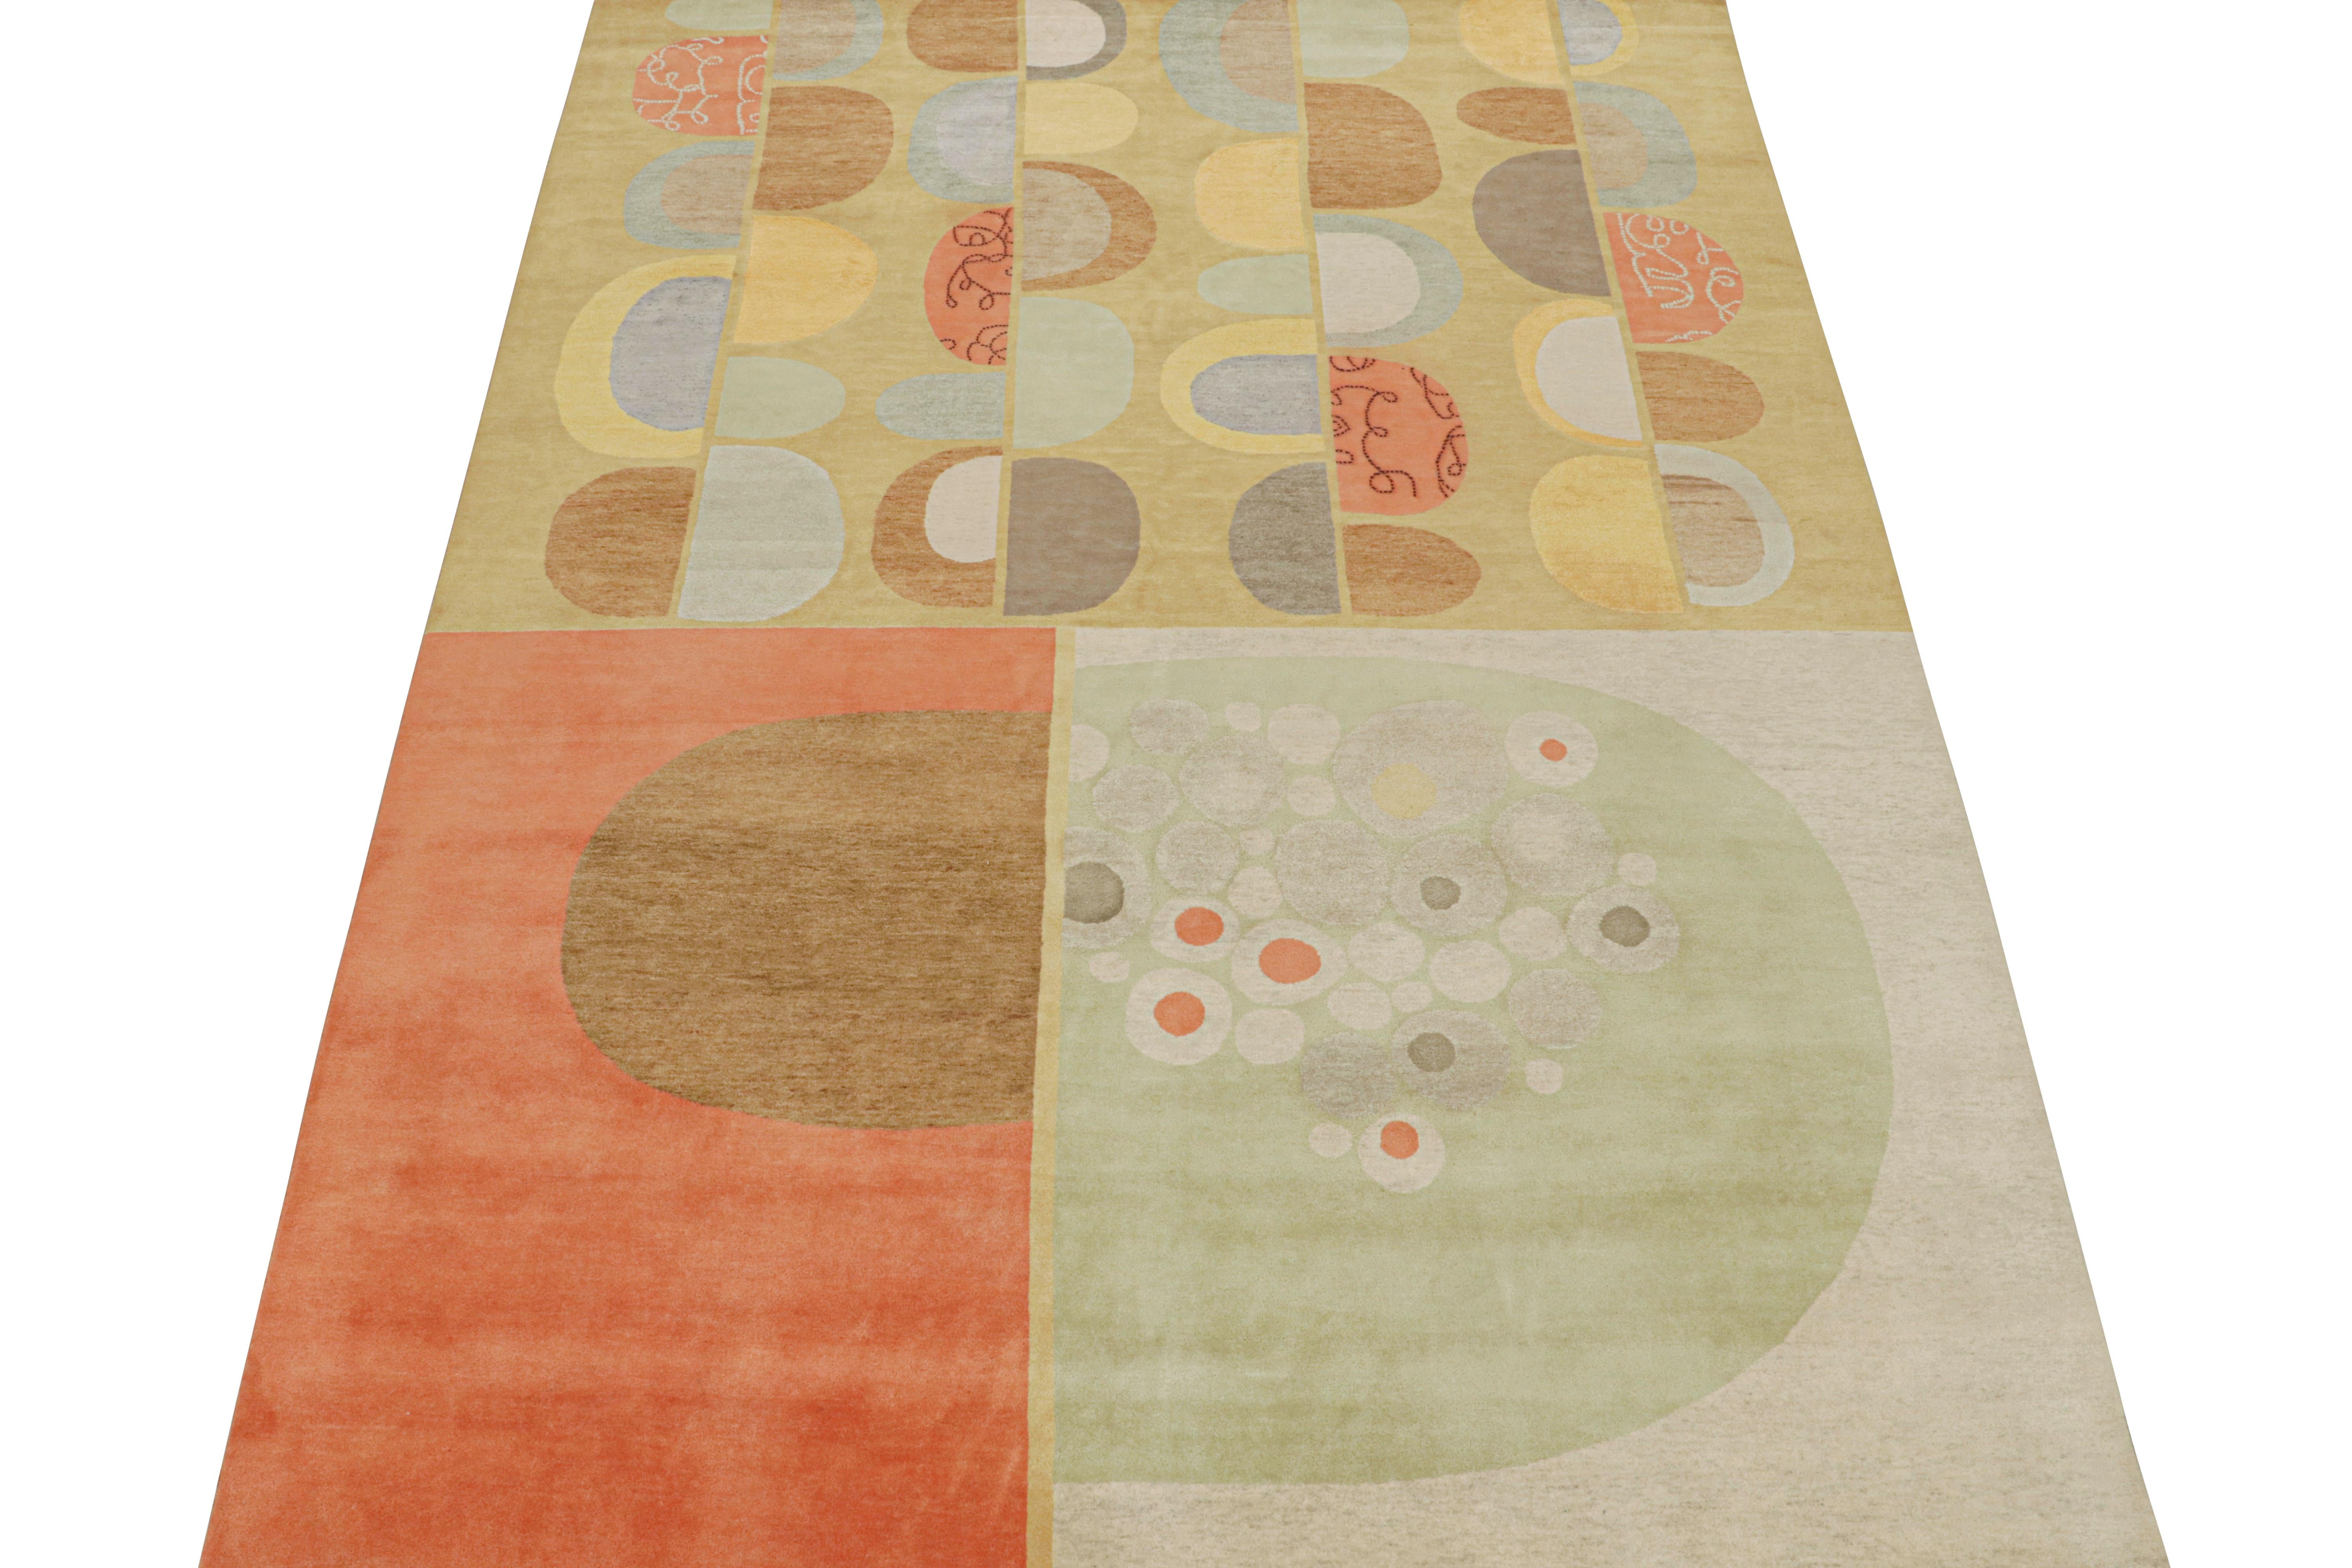 This 9x12 rug is an exciting new addition to the Mid-Century Modern rug collection by Rug & Kilim. Hand-knotted in wool, cotton and silk, this piece is a designer rug in collaboration with artist Jenn Ski. 

Further on the Design: 

The